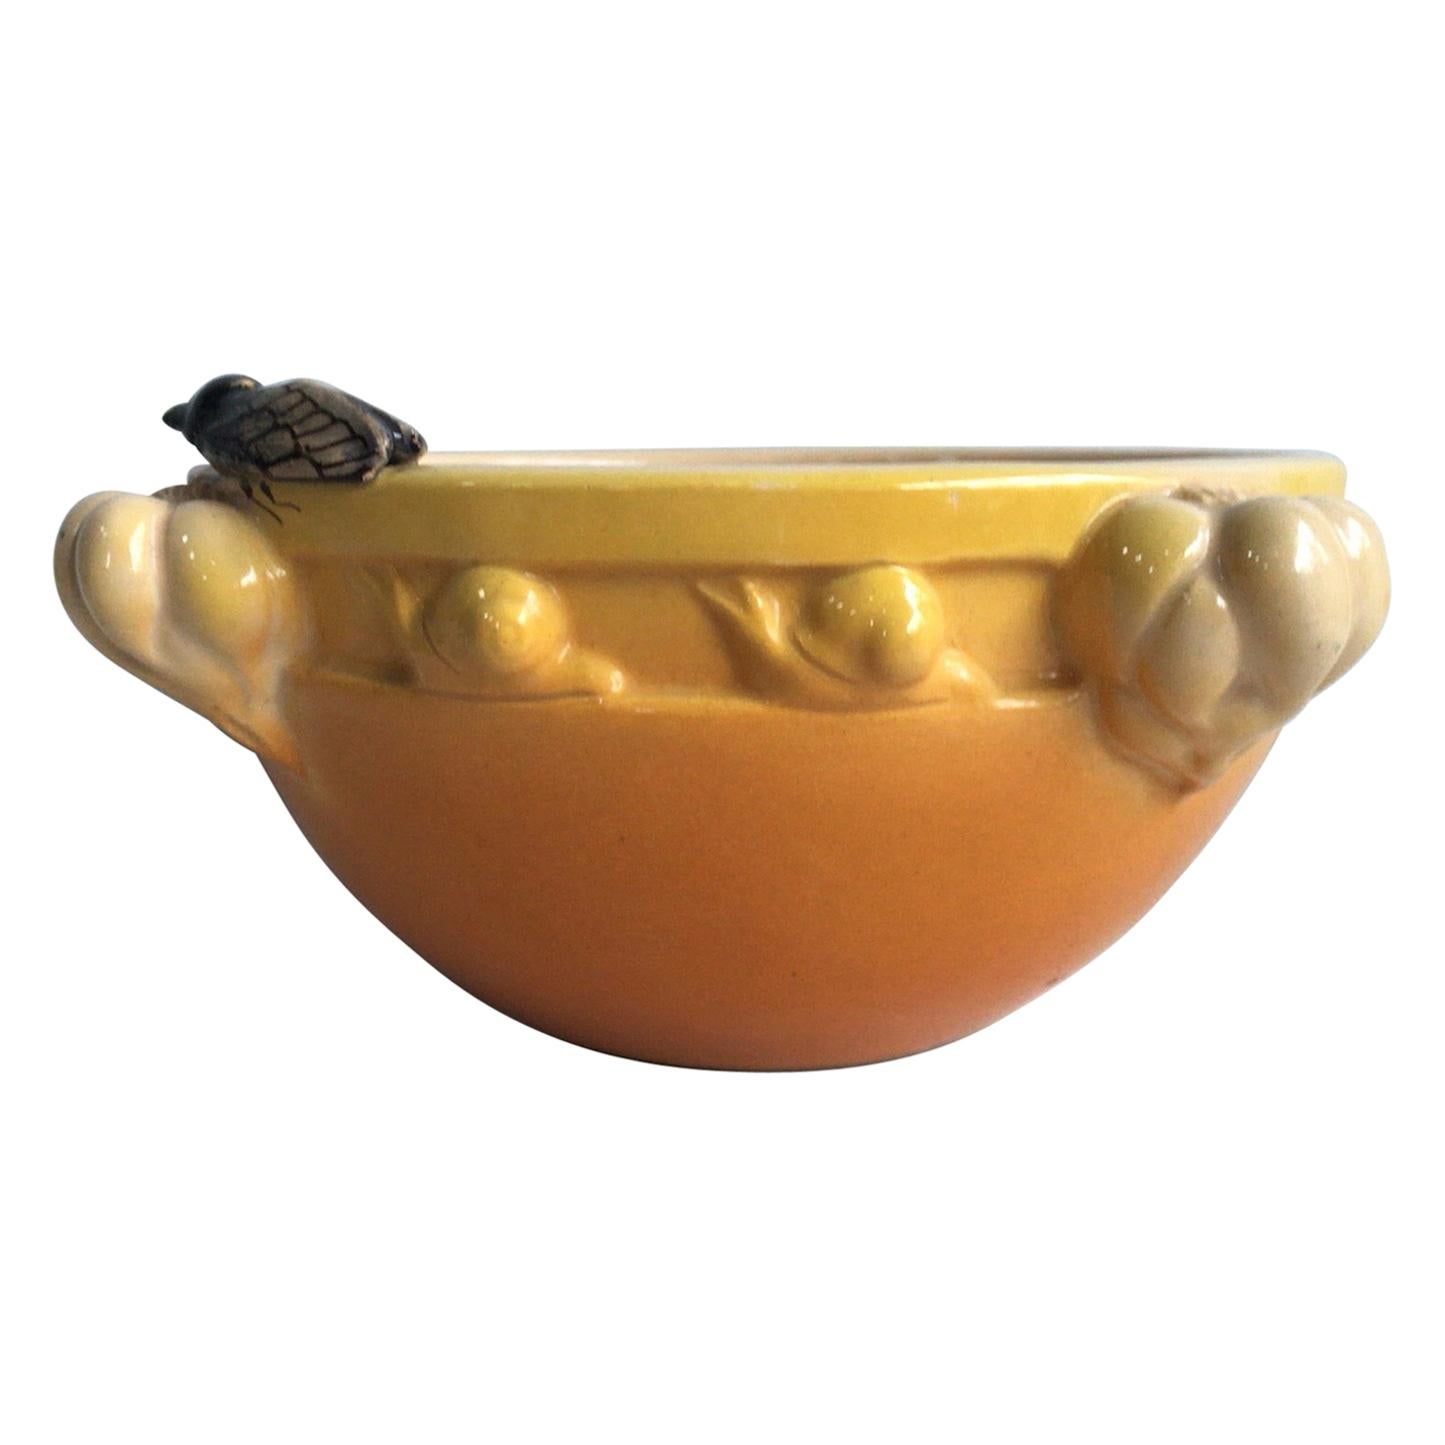 Large Majolica Jardiniere with Cicada and Snails, circa 1950